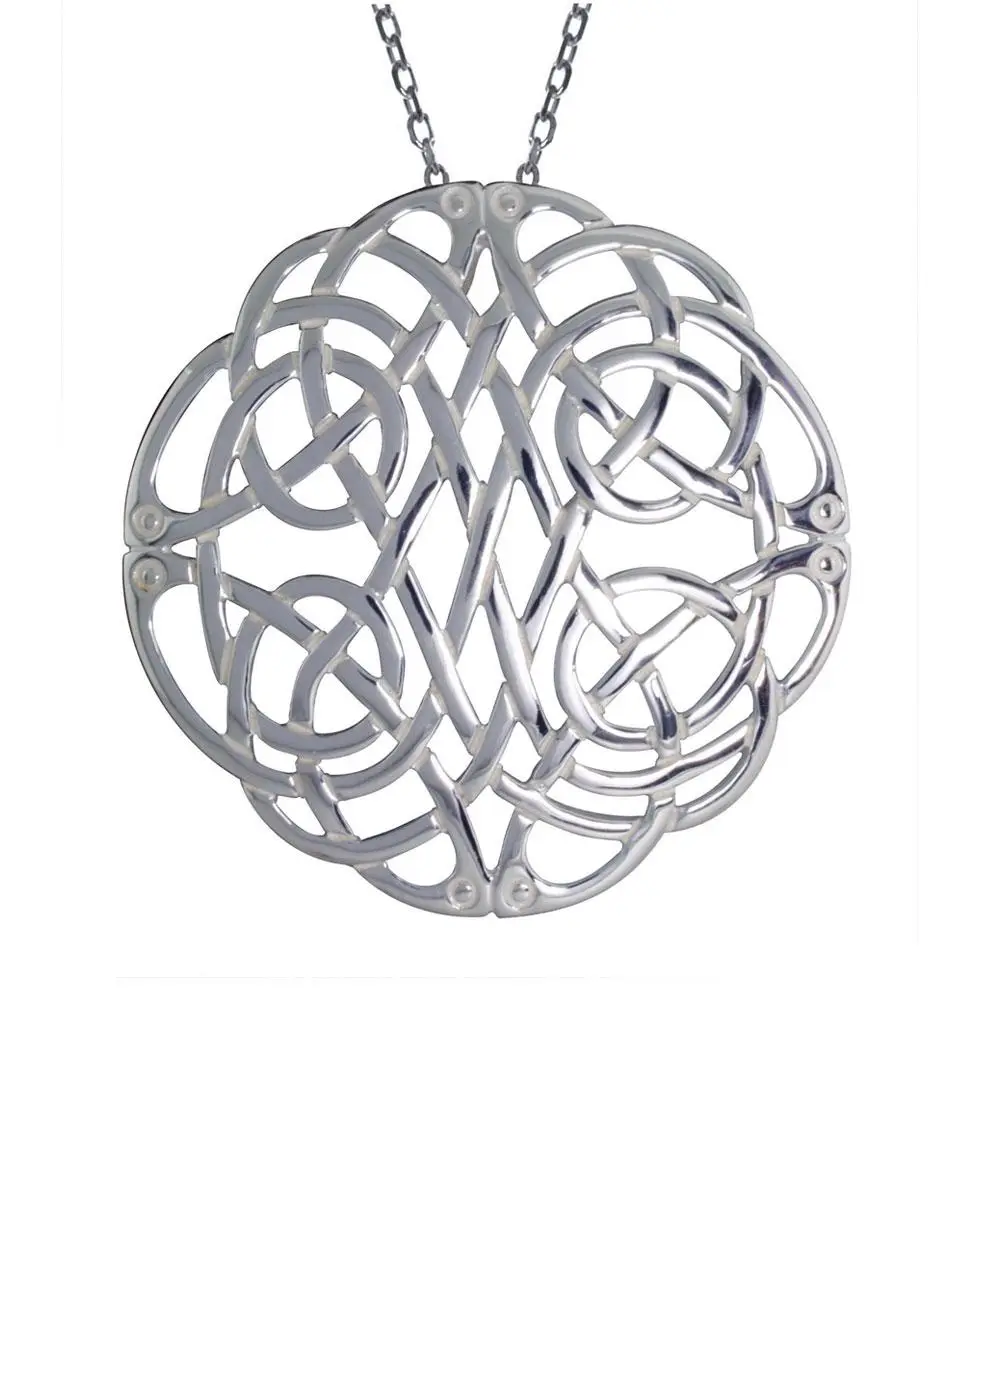 White background cut out shot of Sterling Silver Large Celtic Pendant